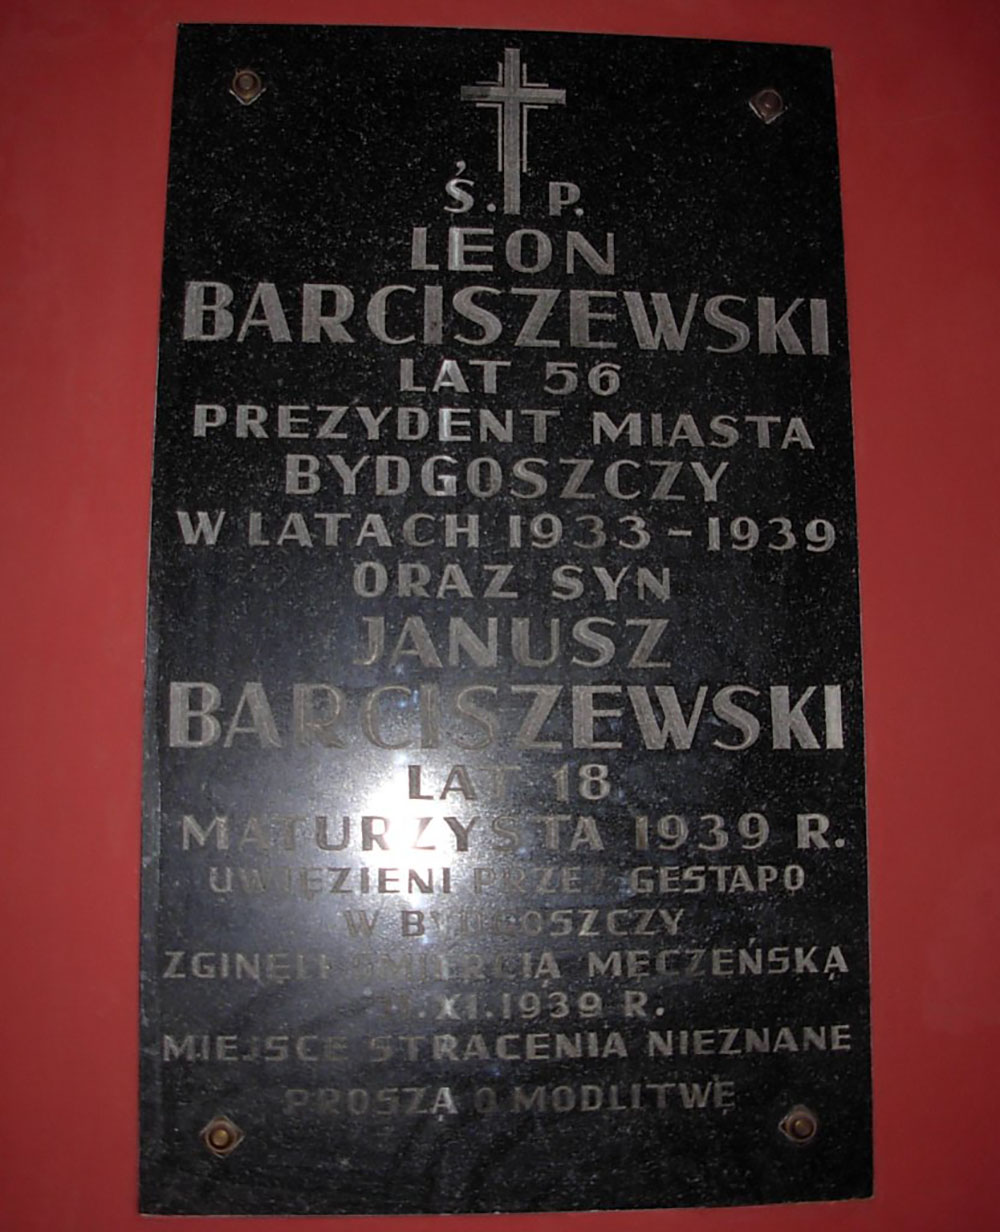 Plaques Bydgoszcz Cathedral #2